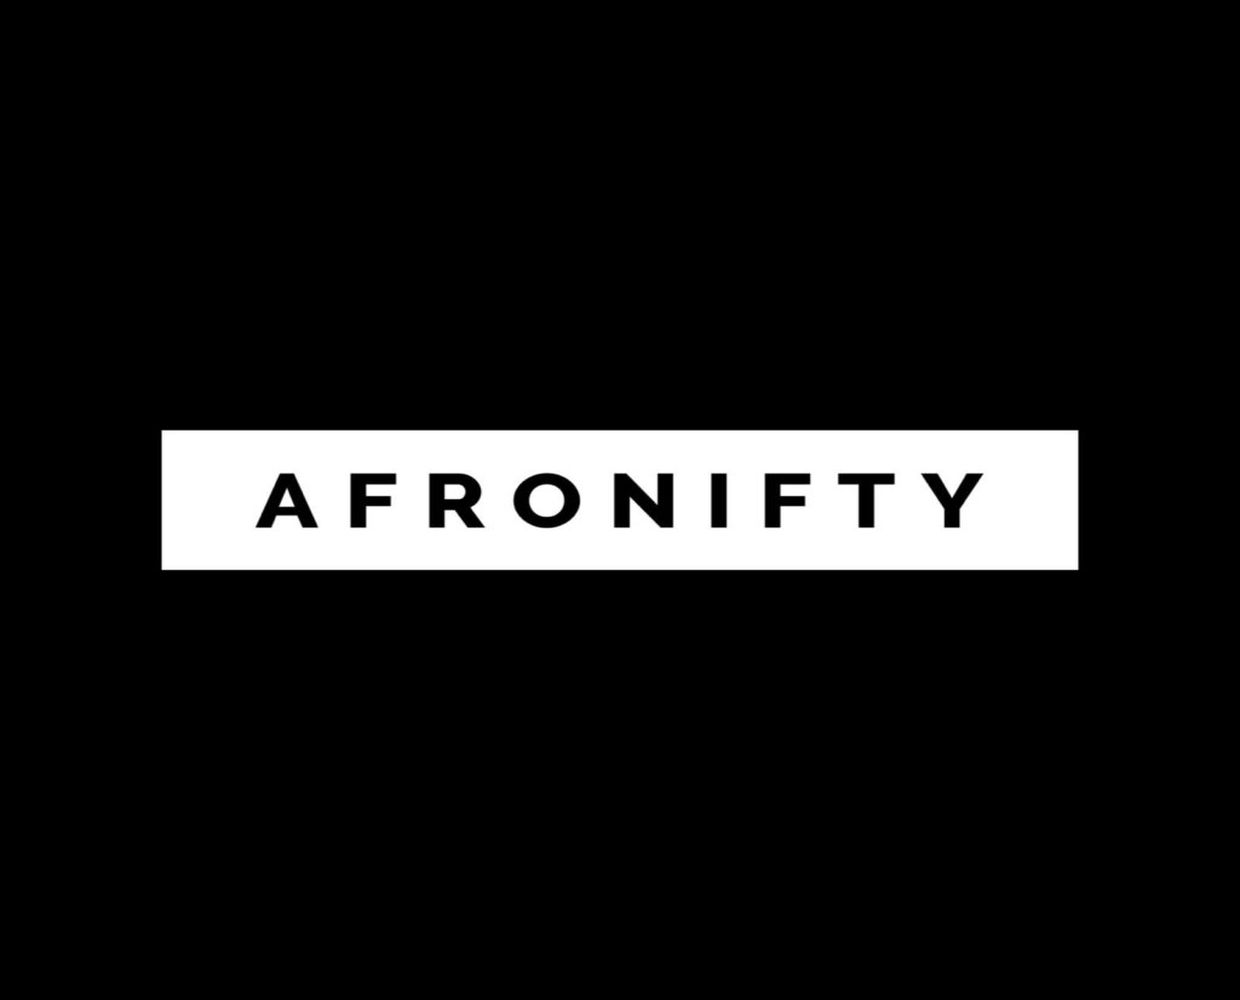 How Did Afronifty Leverage Afrobeats’ Rise To Become The Biggest NFT Marketplace In Africa?